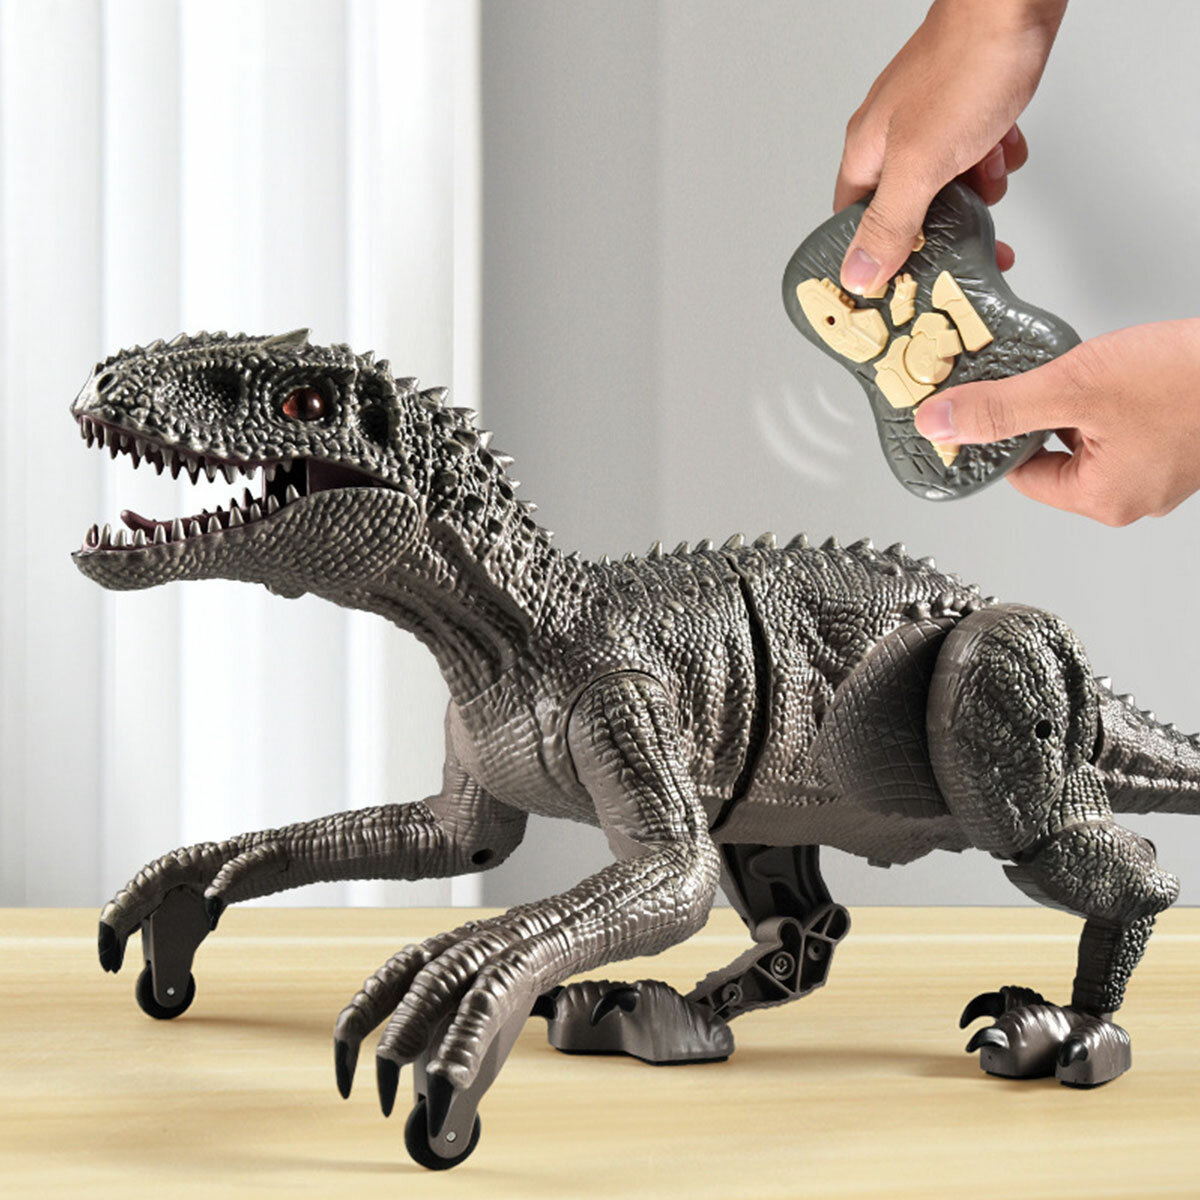 Simulation Tyrannosaurus Rex RC Raptors Electric Walking Simulation Animal Remote Control Jurassic Dinobot Model with Sound and Lights Toy for Kids Gift